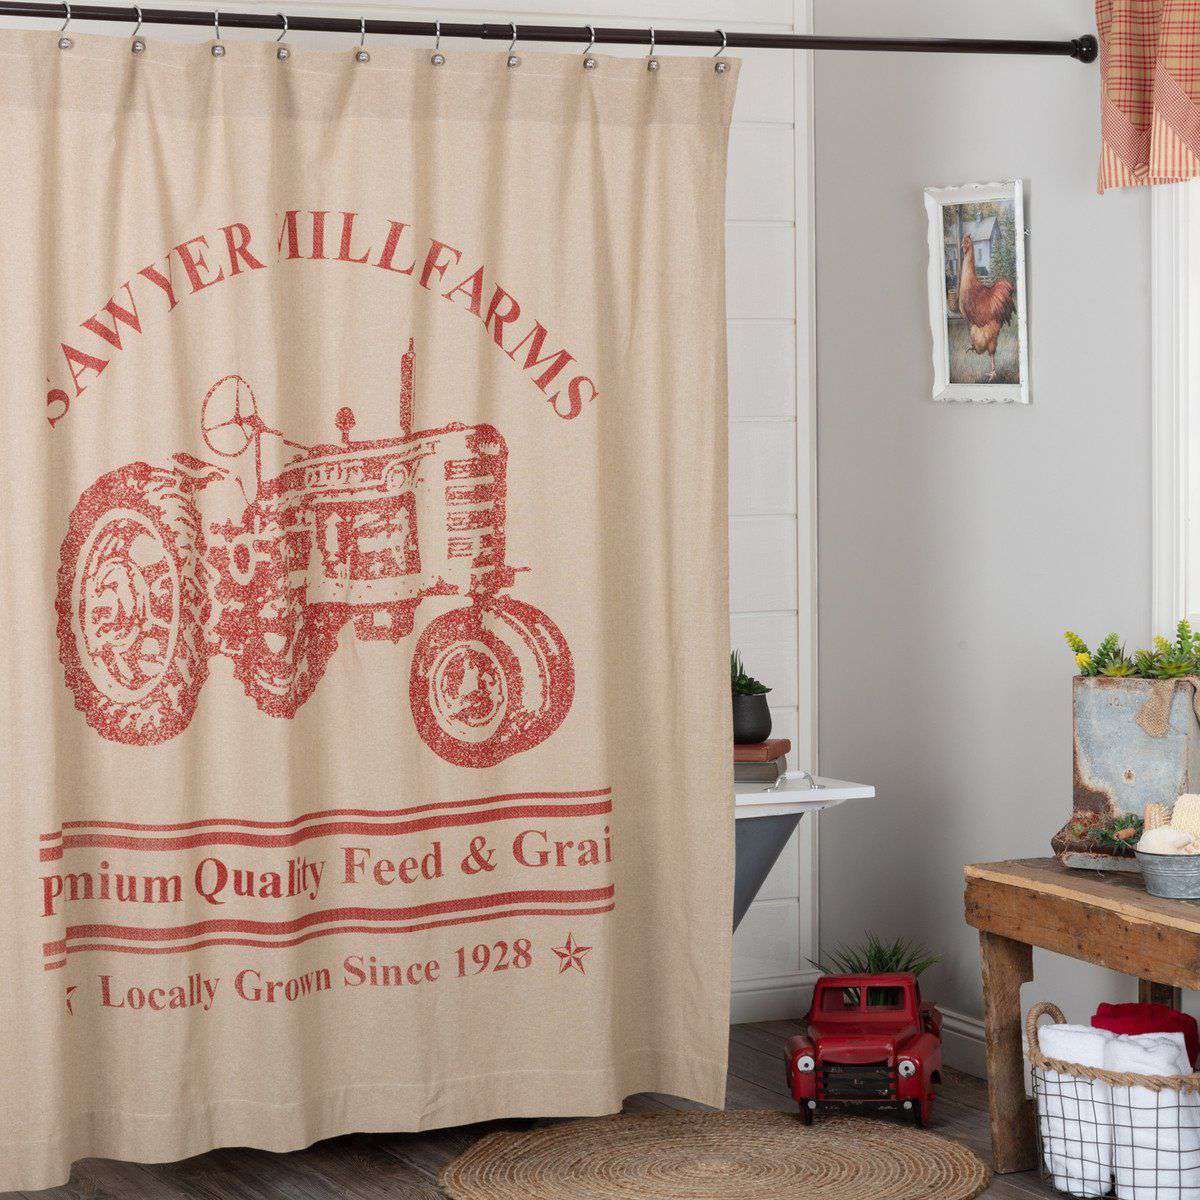 Sawyer Mill Charcoal/Red Tractor Shower Curtain 72"x72" curtain VHC Brands Red 